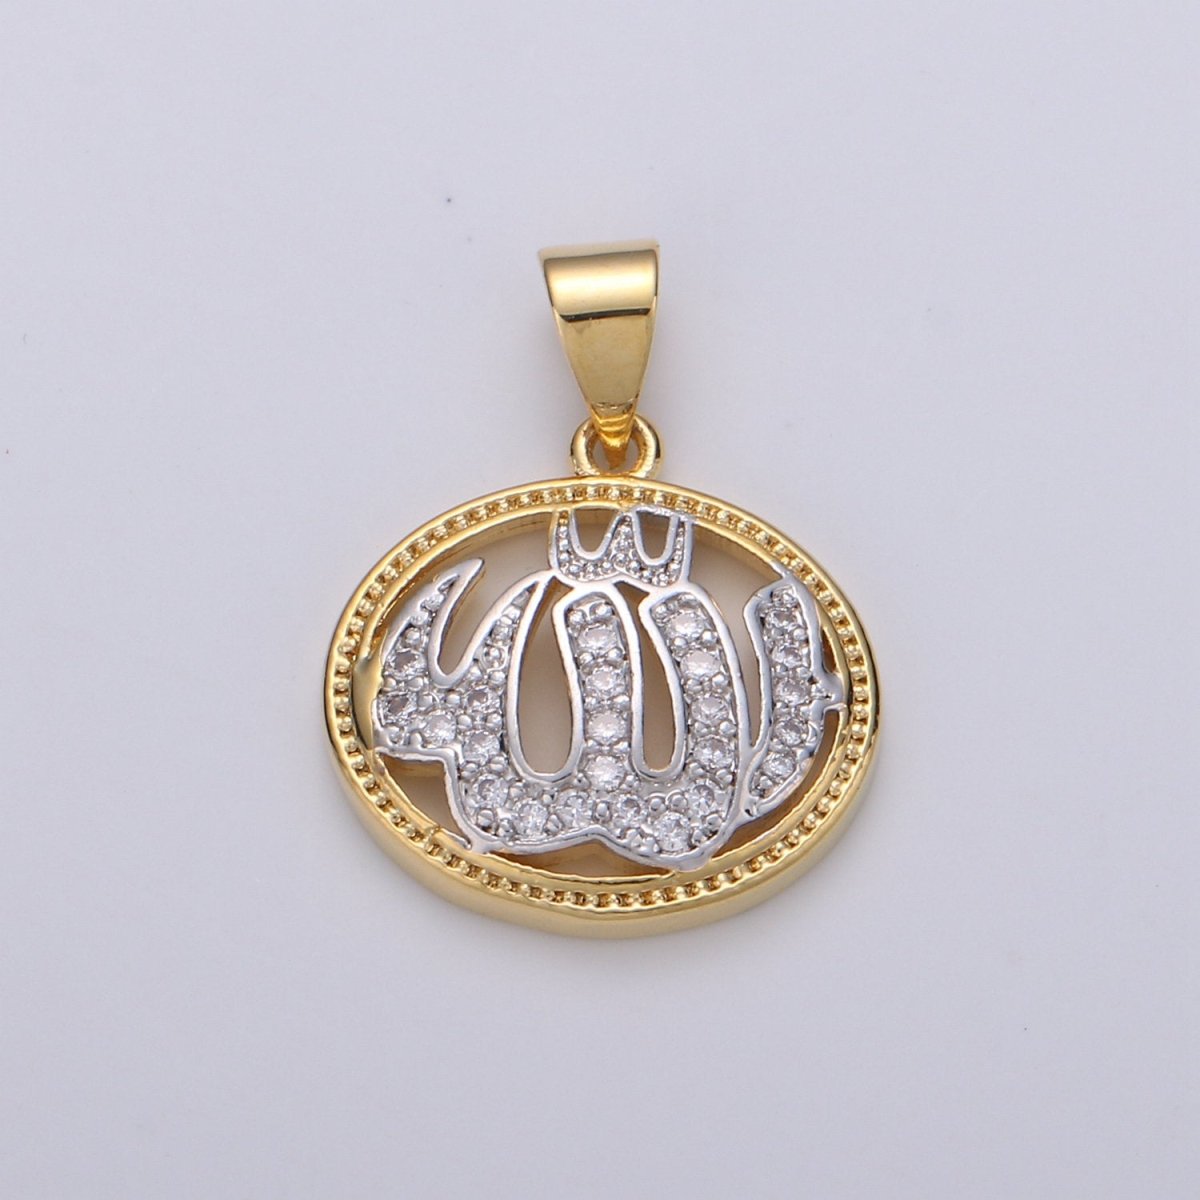 2 Tone Color Pendant in 24k Gold Filled Jewelry Allah Pendant Micro Pave CZ Pendant Necklace for Religious Jewelry I-915 - DLUXCA